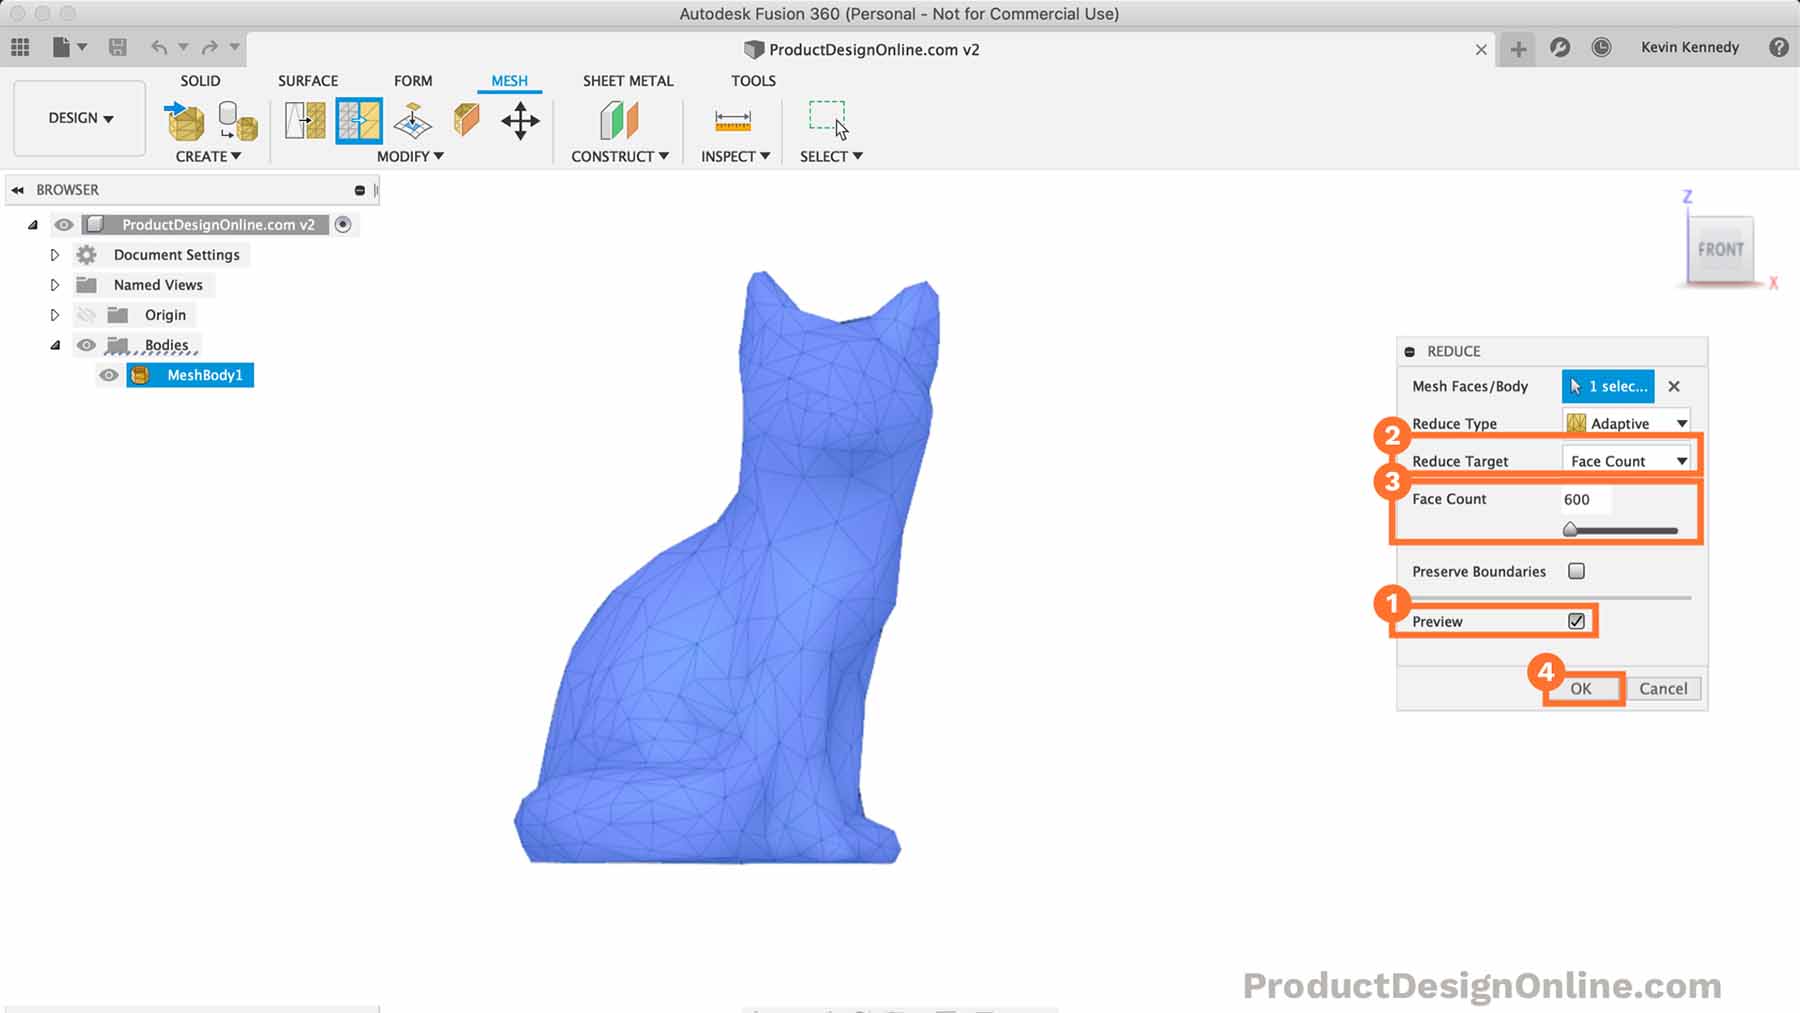 Reduce Target and Face count can be used to create a low poly design in Fusion 360